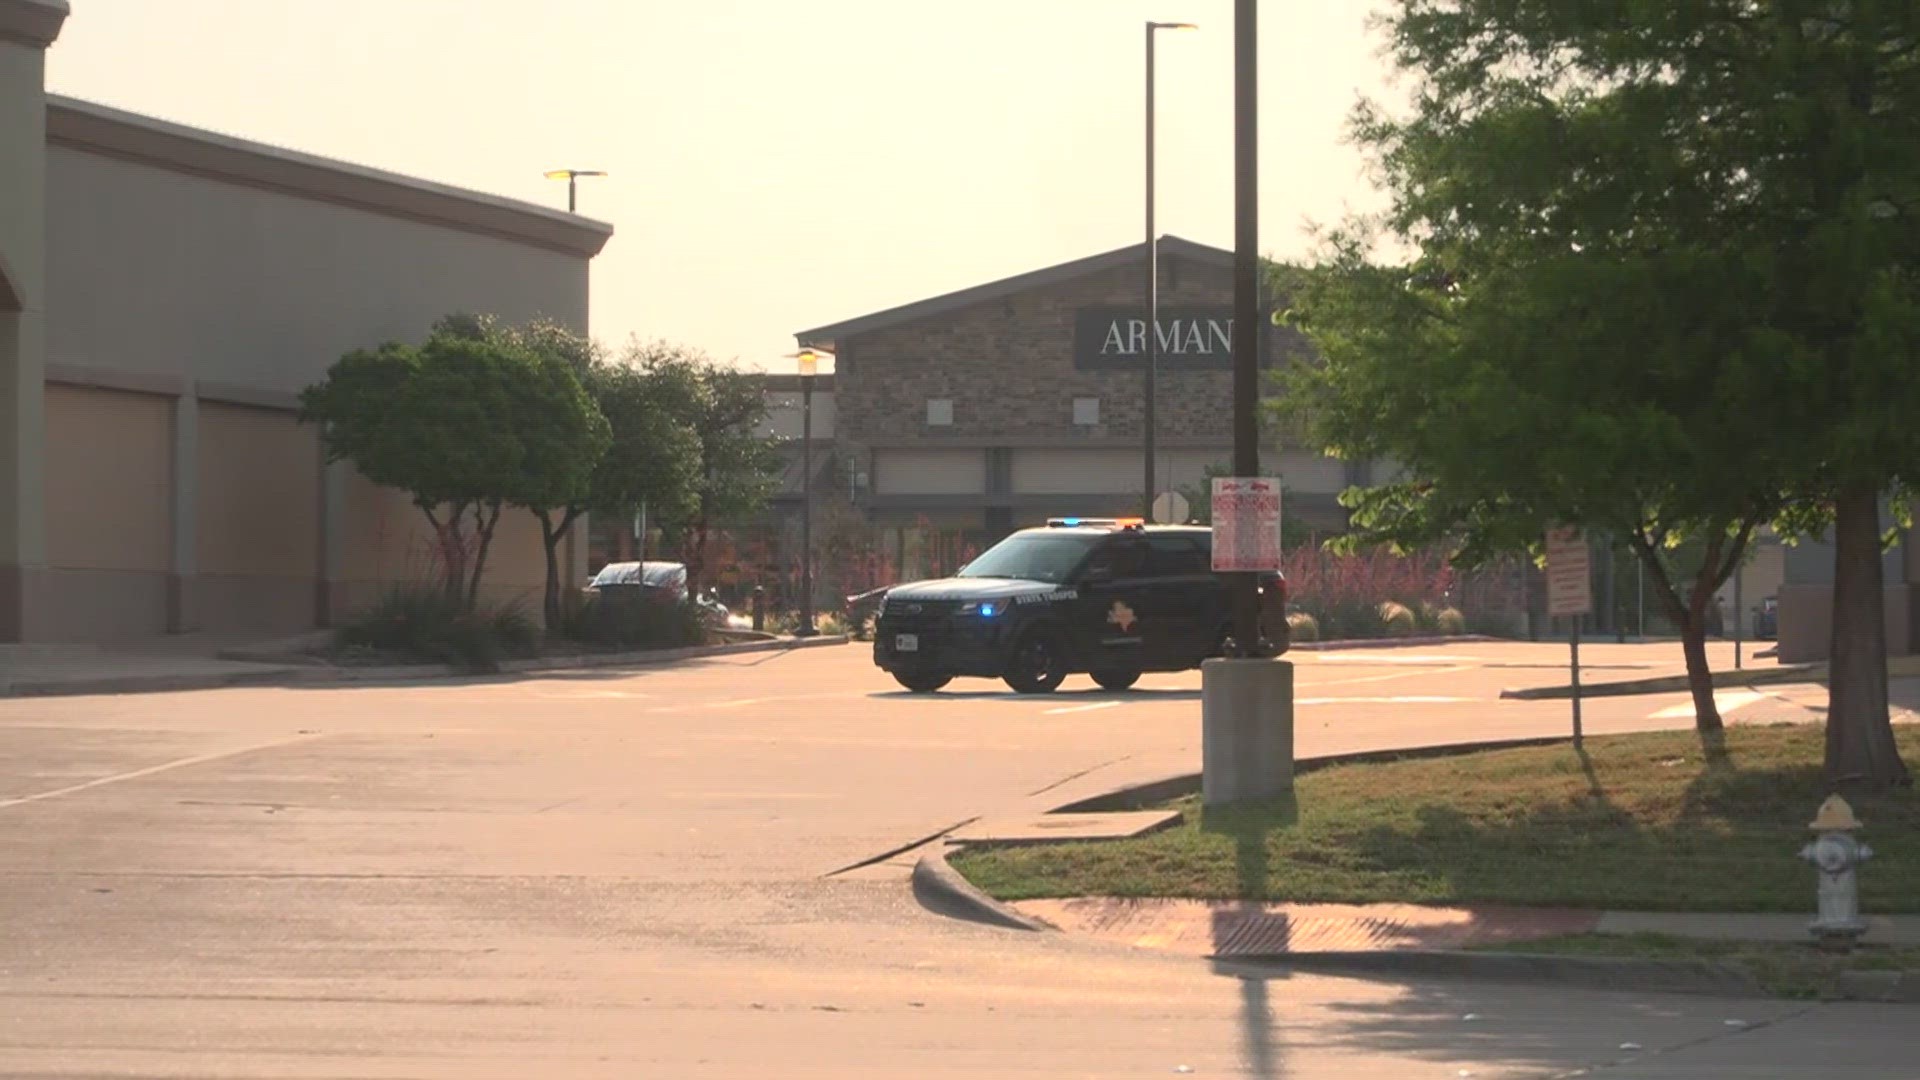 WFAA's Chris Sadeghi was at the Allen Premium Outlets mall Sunday morning, the day after a mass shooting left 8 victims dead.